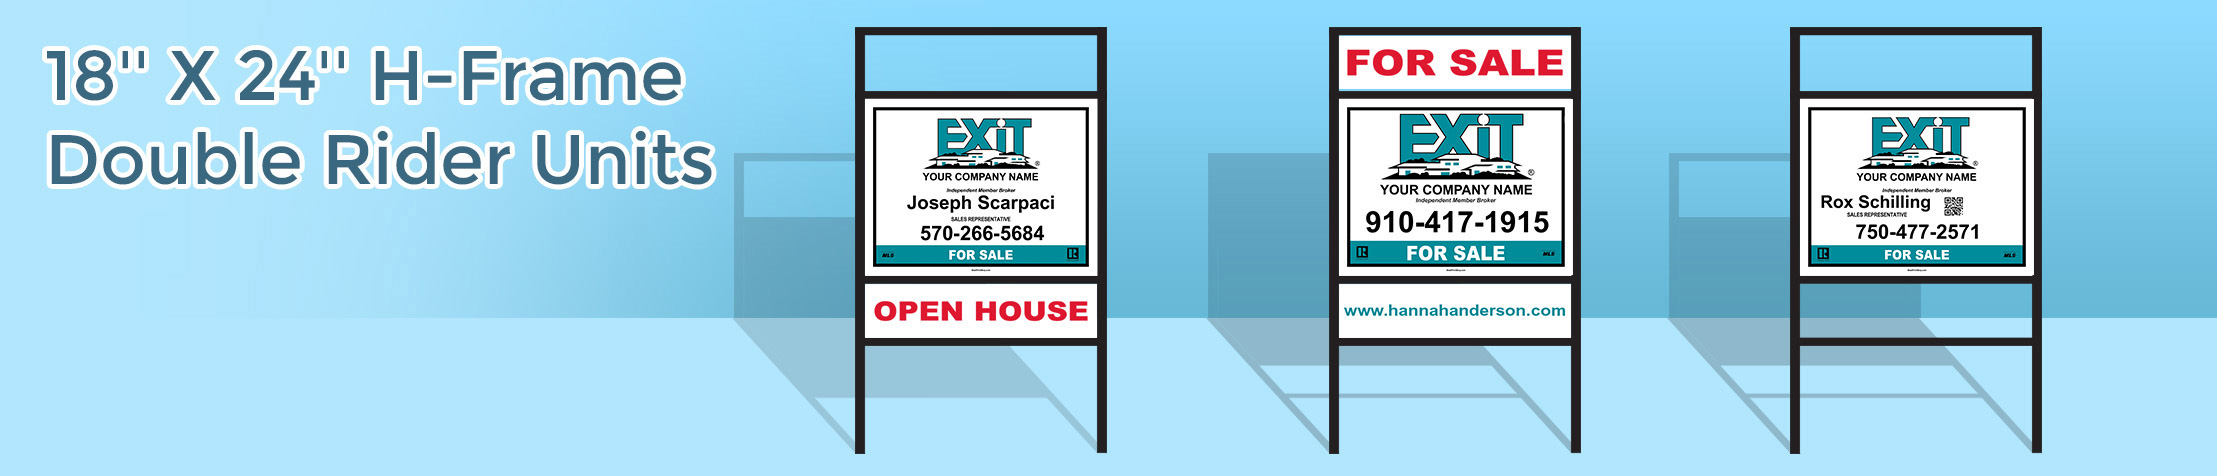 Exit Realty Real Estate 18